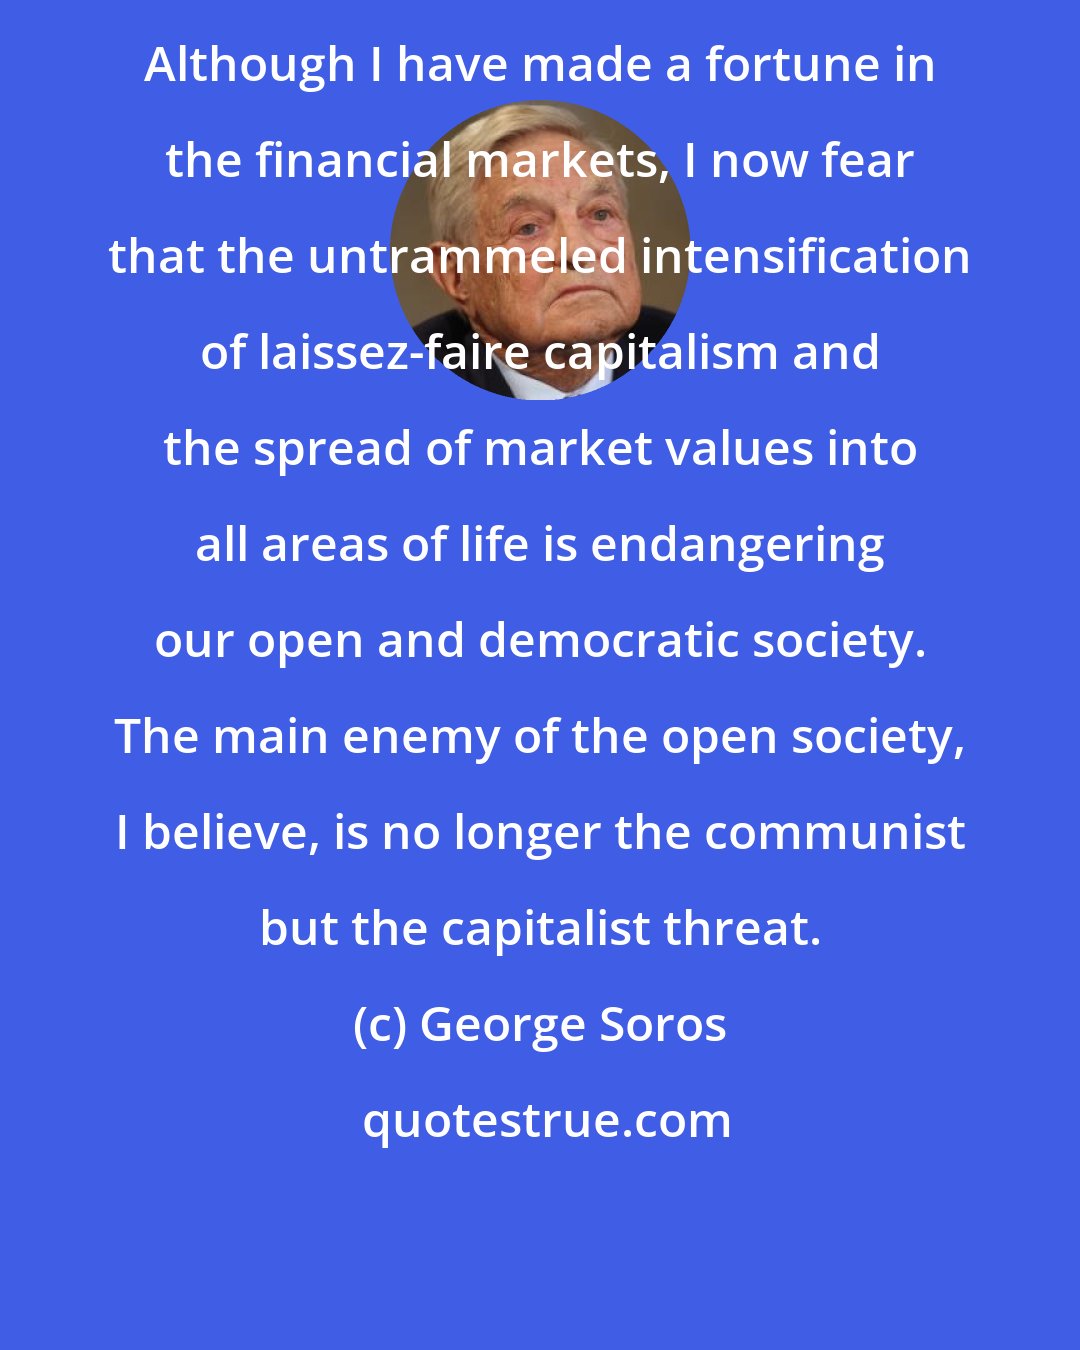 George Soros: Although I have made a fortune in the financial markets, I now fear that the untrammeled intensification of laissez-faire capitalism and the spread of market values into all areas of life is endangering our open and democratic society. The main enemy of the open society, I believe, is no longer the communist but the capitalist threat.